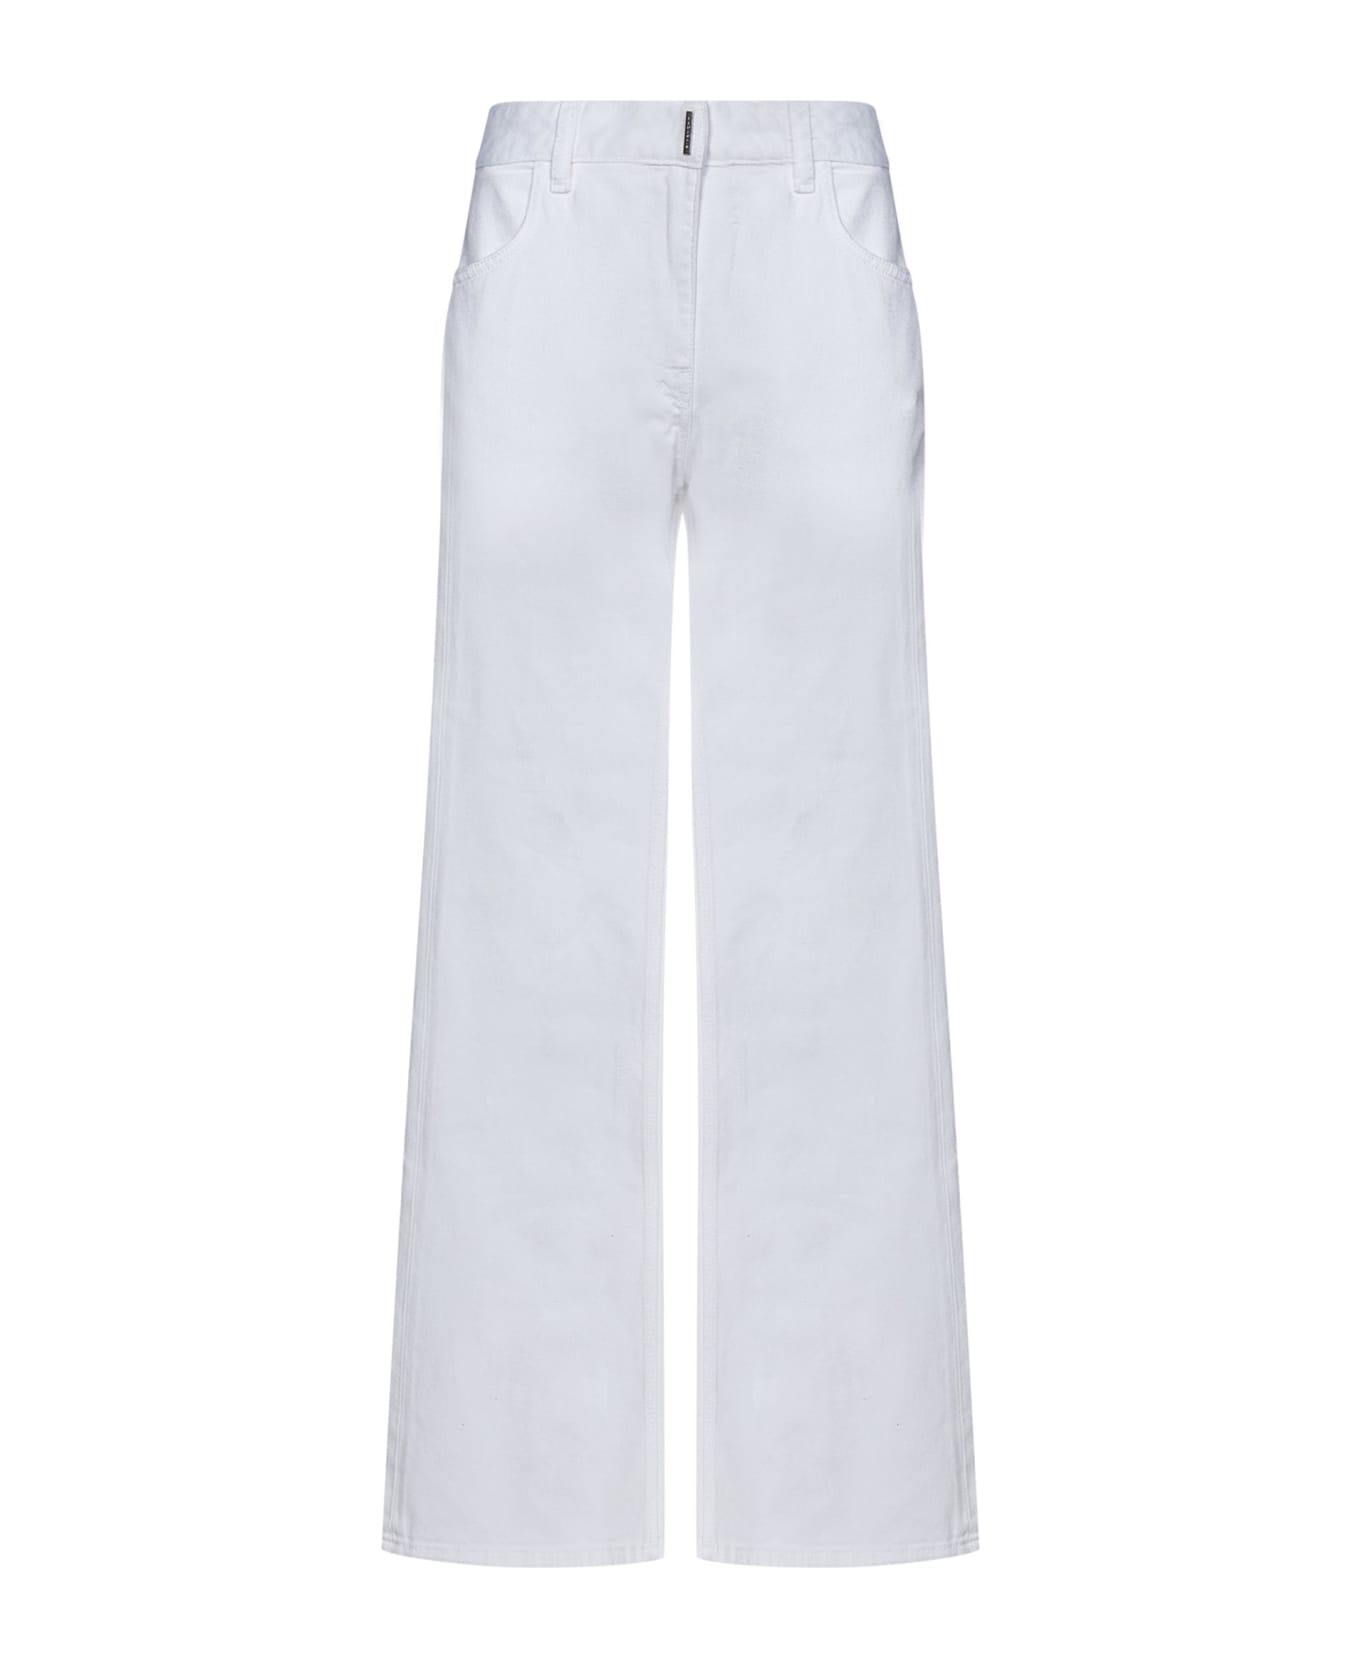 Givenchy Jeans - White ボトムス